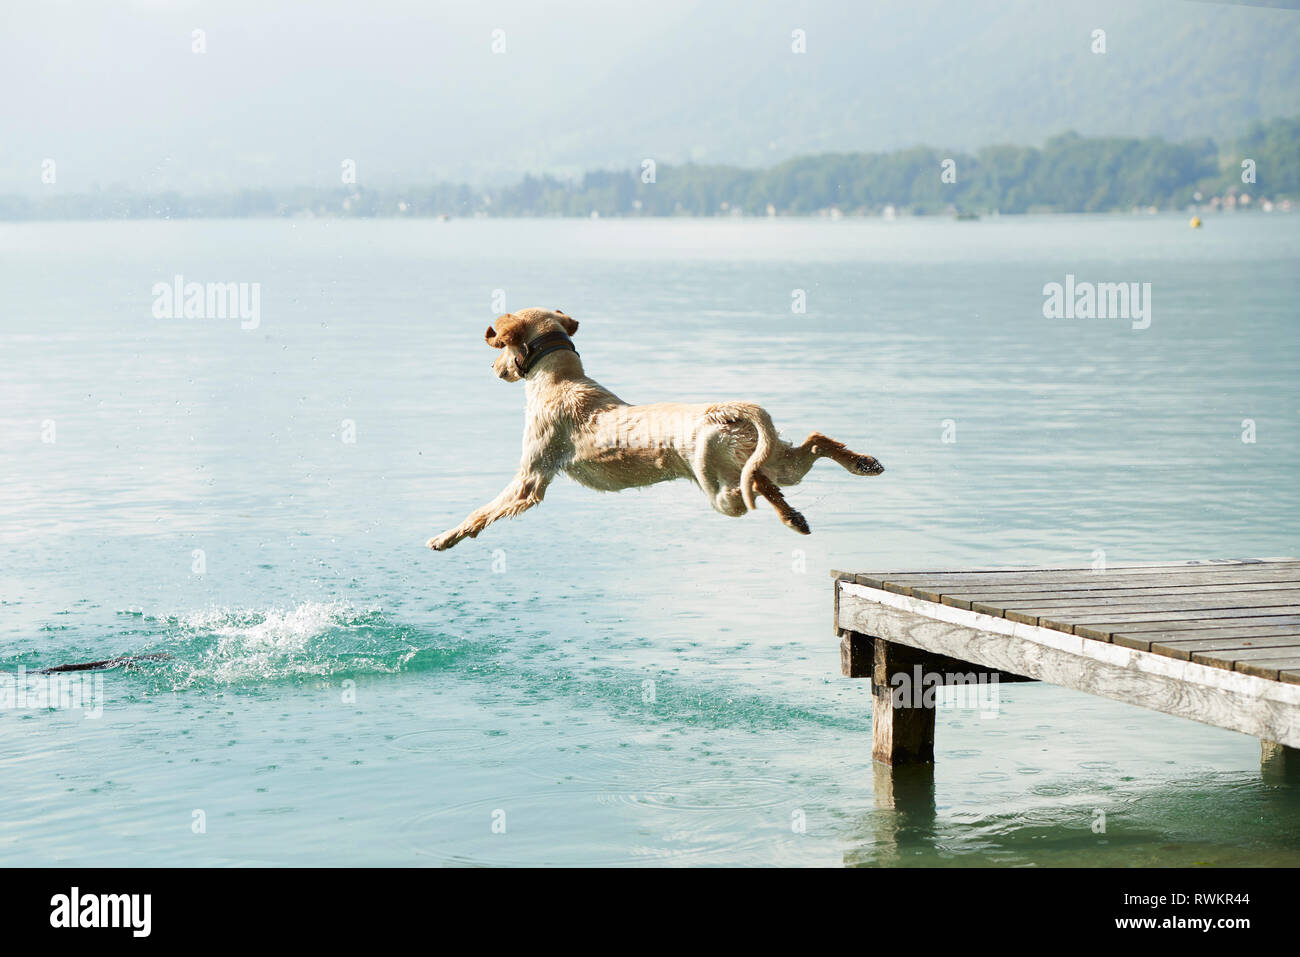 Dog jumping off pier into Lac d'Annecy, Annecy, France Stock Photo